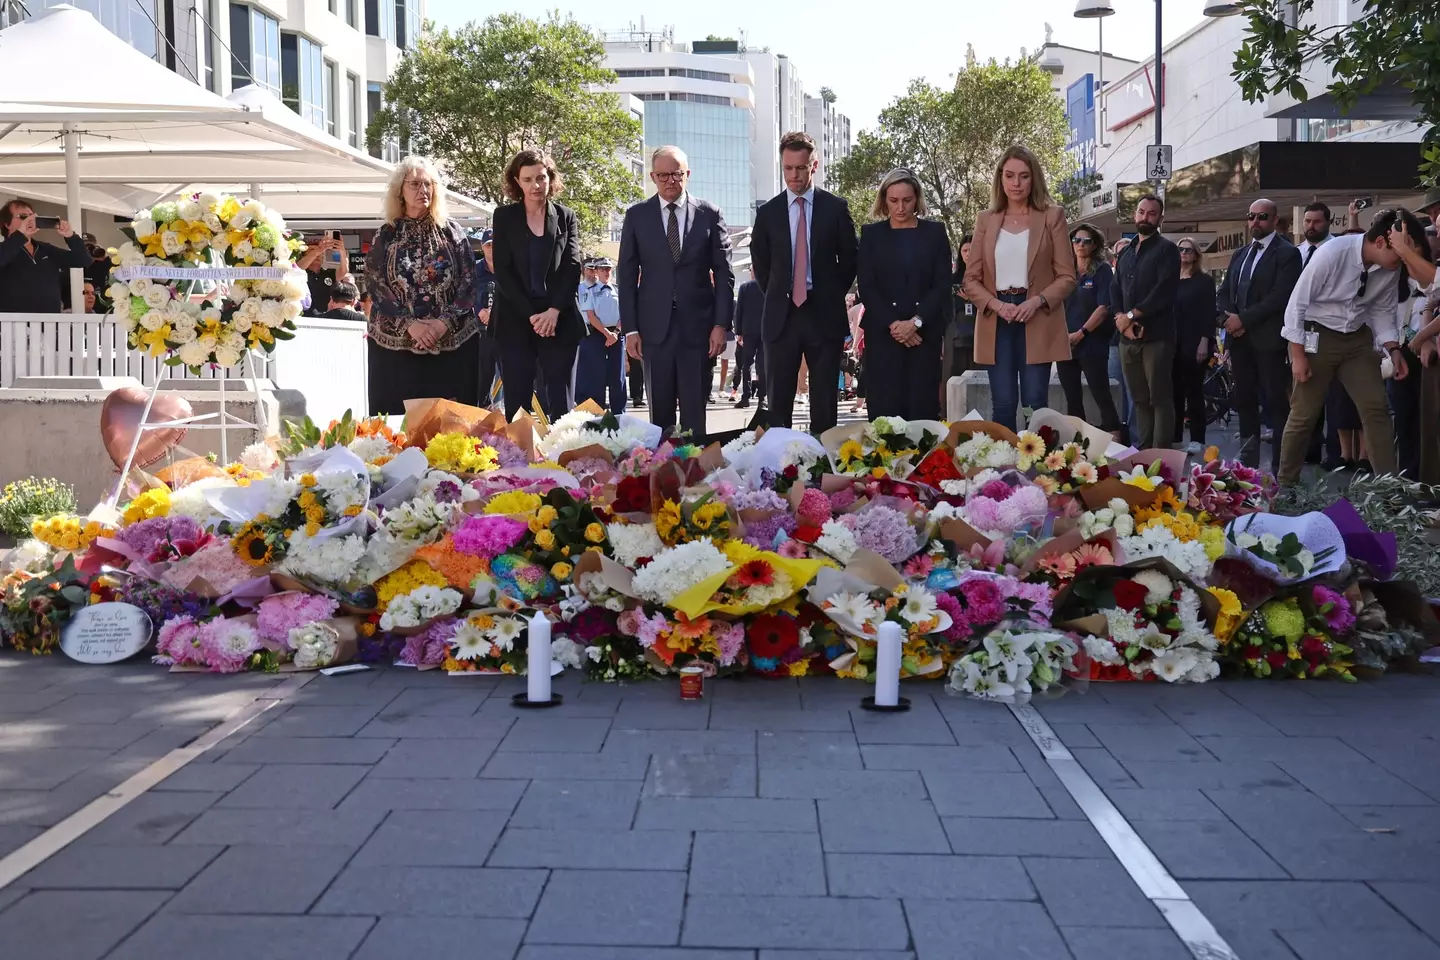 People paid tribute to those lost in the attack (DAVID GRAY/AFP via Getty Images) 